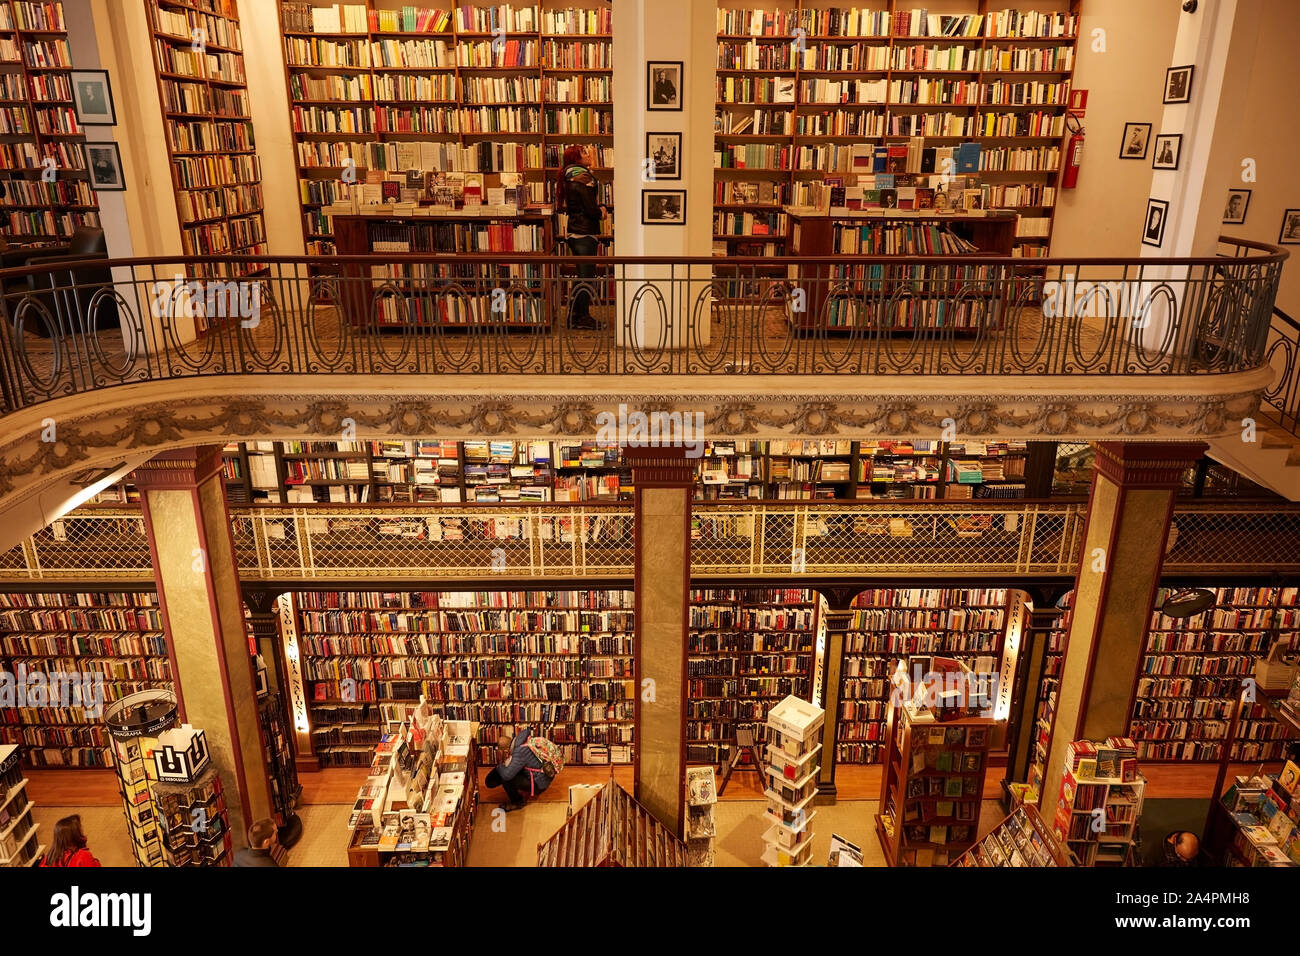 Interiors of the historical "Puro Verso" library, in the old cask of  Montevideo, Uruguay Stock Photo - Alamy